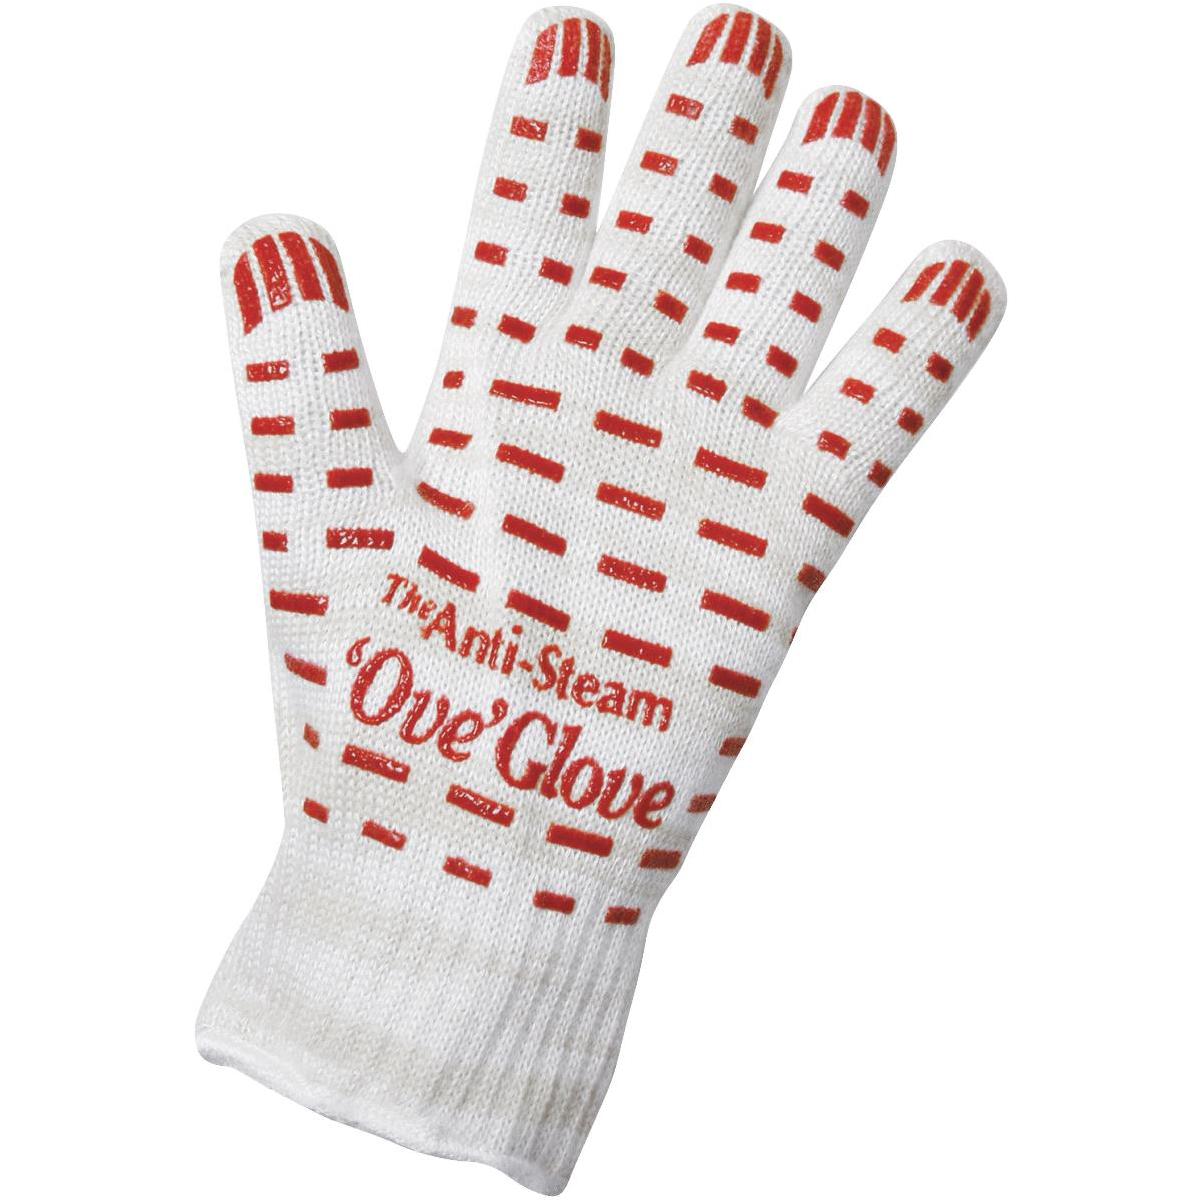 Ove Glove GIF Anti-Steam, Hot Surface Handler Oven Mitt Glove, Right Hand,  Perfect for Kitchen/Grilling, 540 Degree Resistance, As Seen On TV  Household Gift, Heat, Flame & Steam 